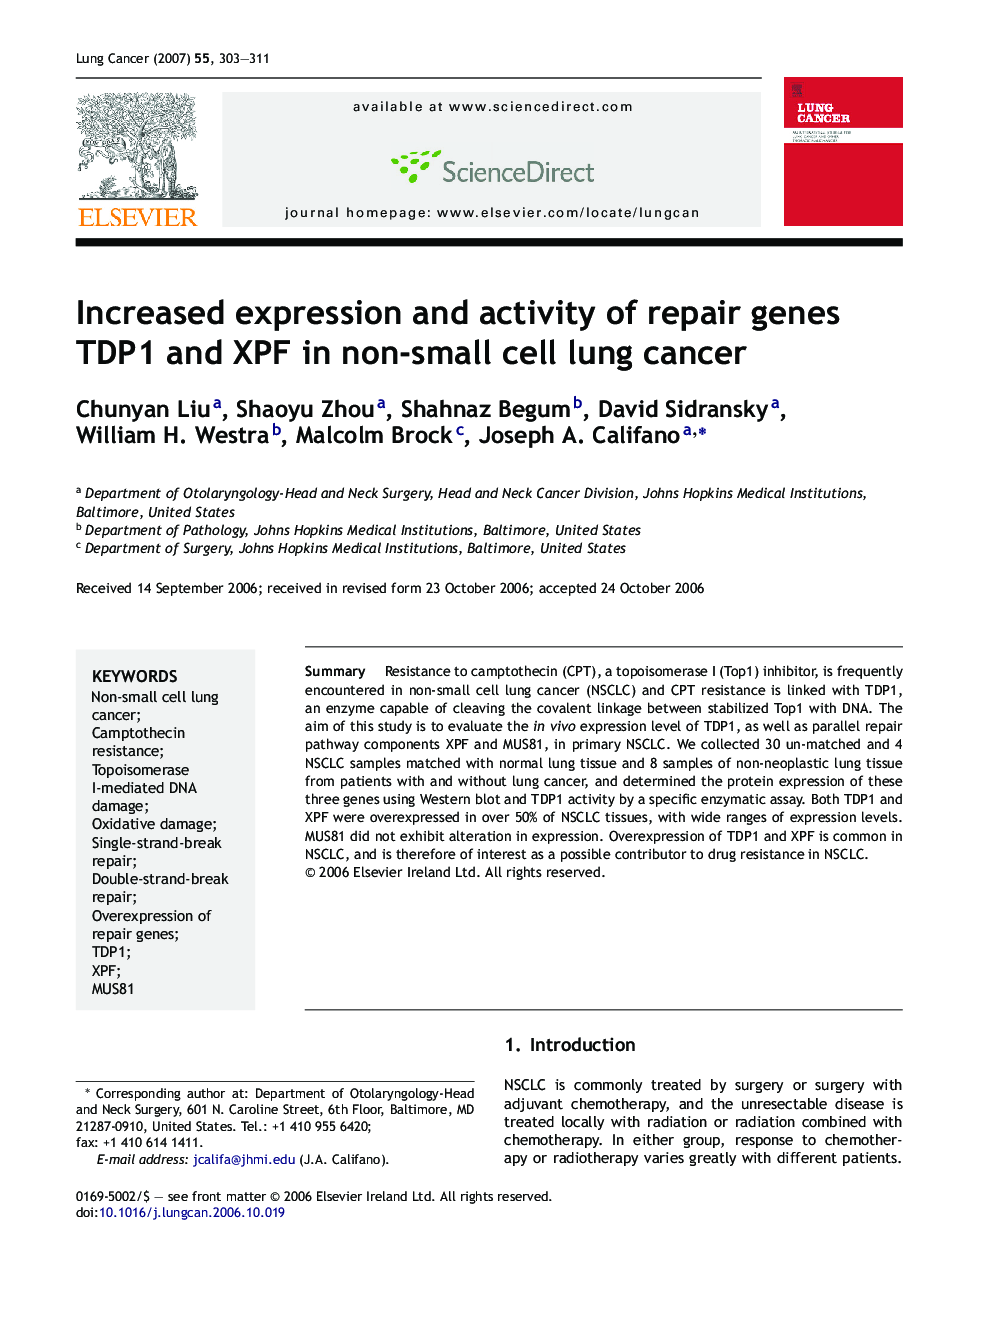 Increased expression and activity of repair genes TDP1 and XPF in non-small cell lung cancer